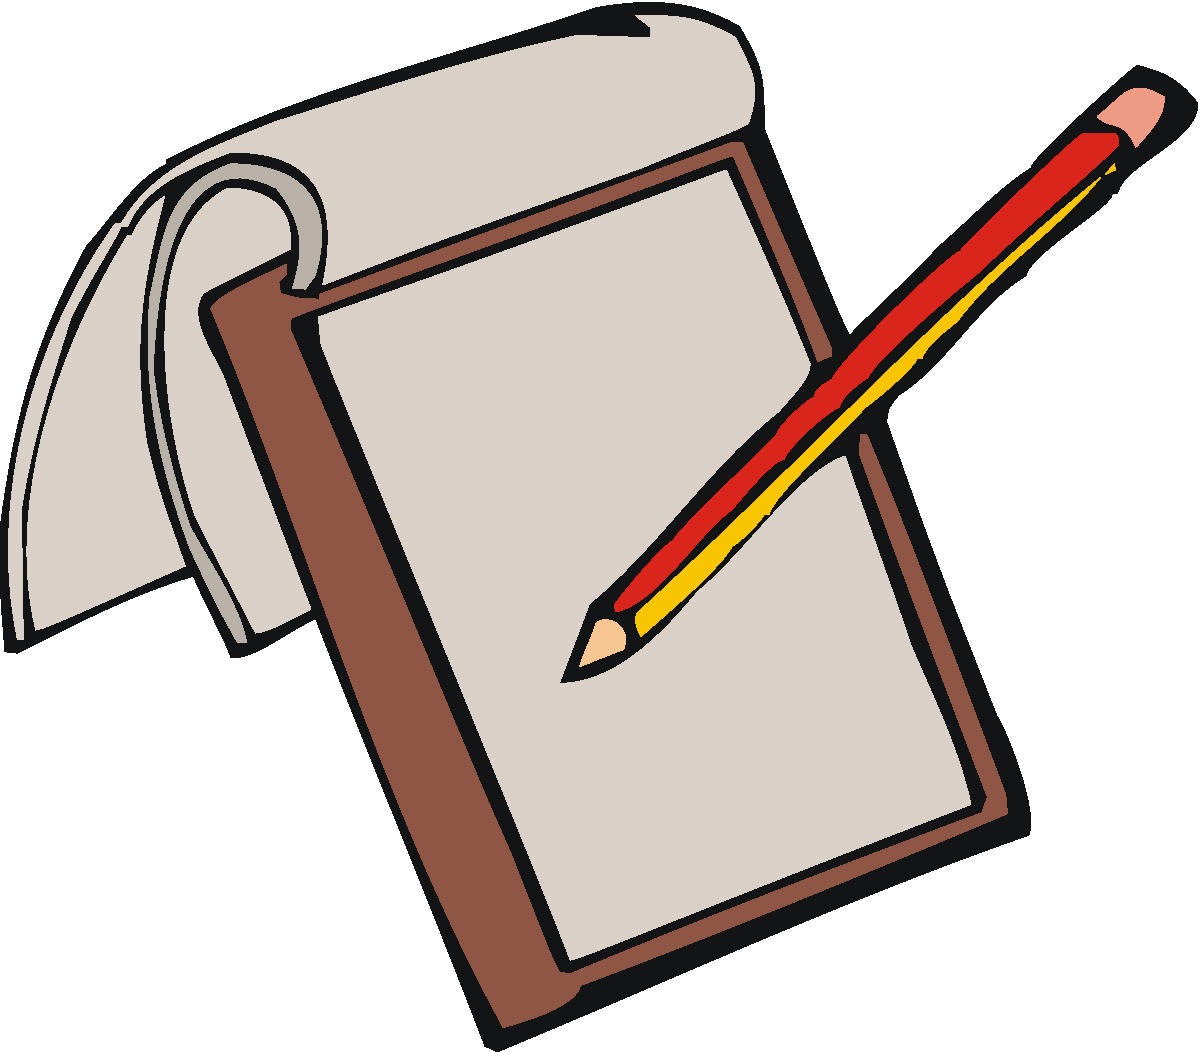 Pencil And Paper Writing . - Pen And Paper Clip Art